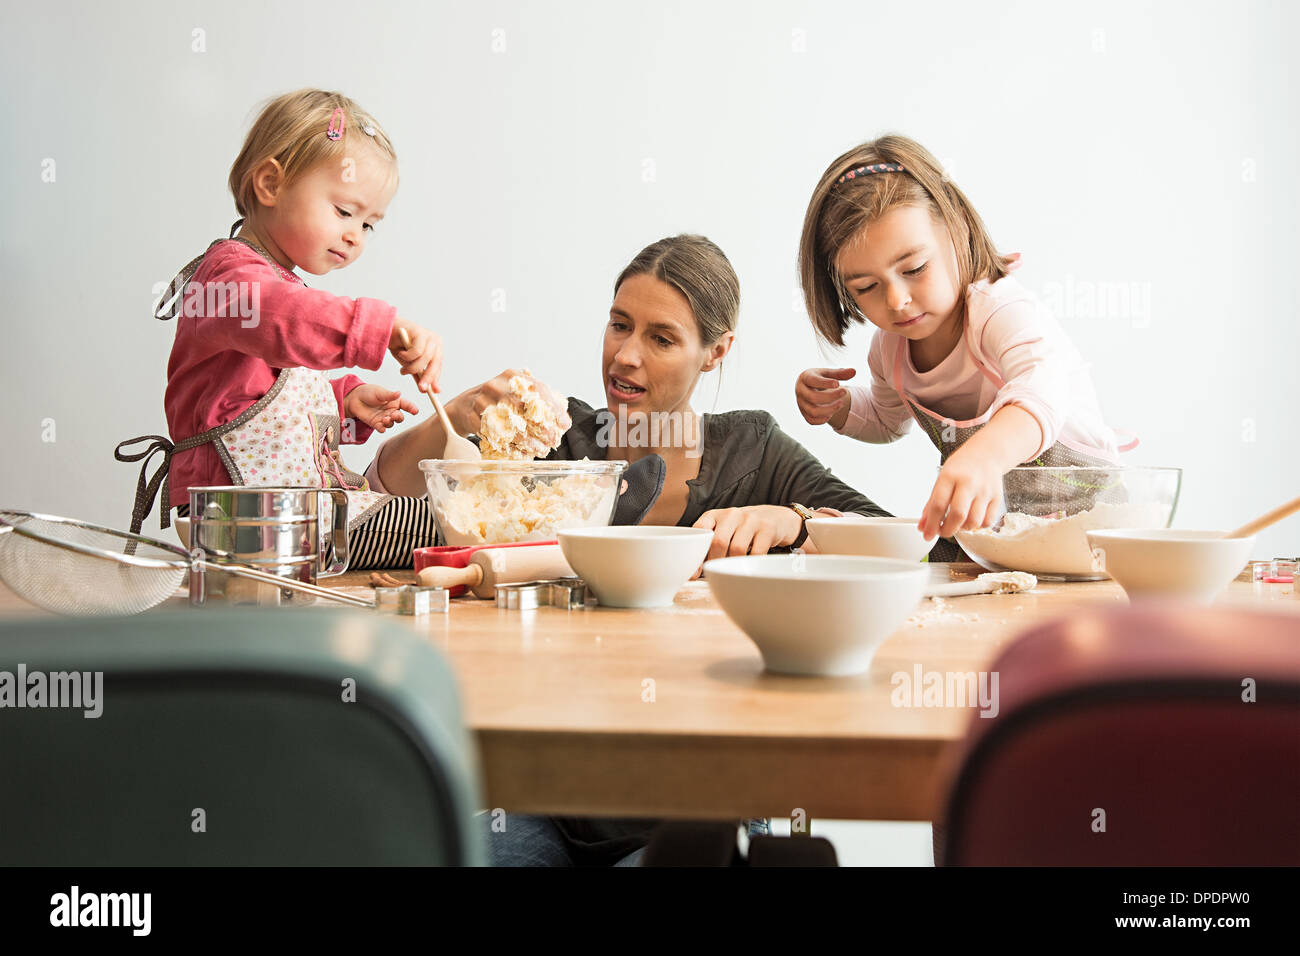 Mother and children baking, mixing batter Stock Photo